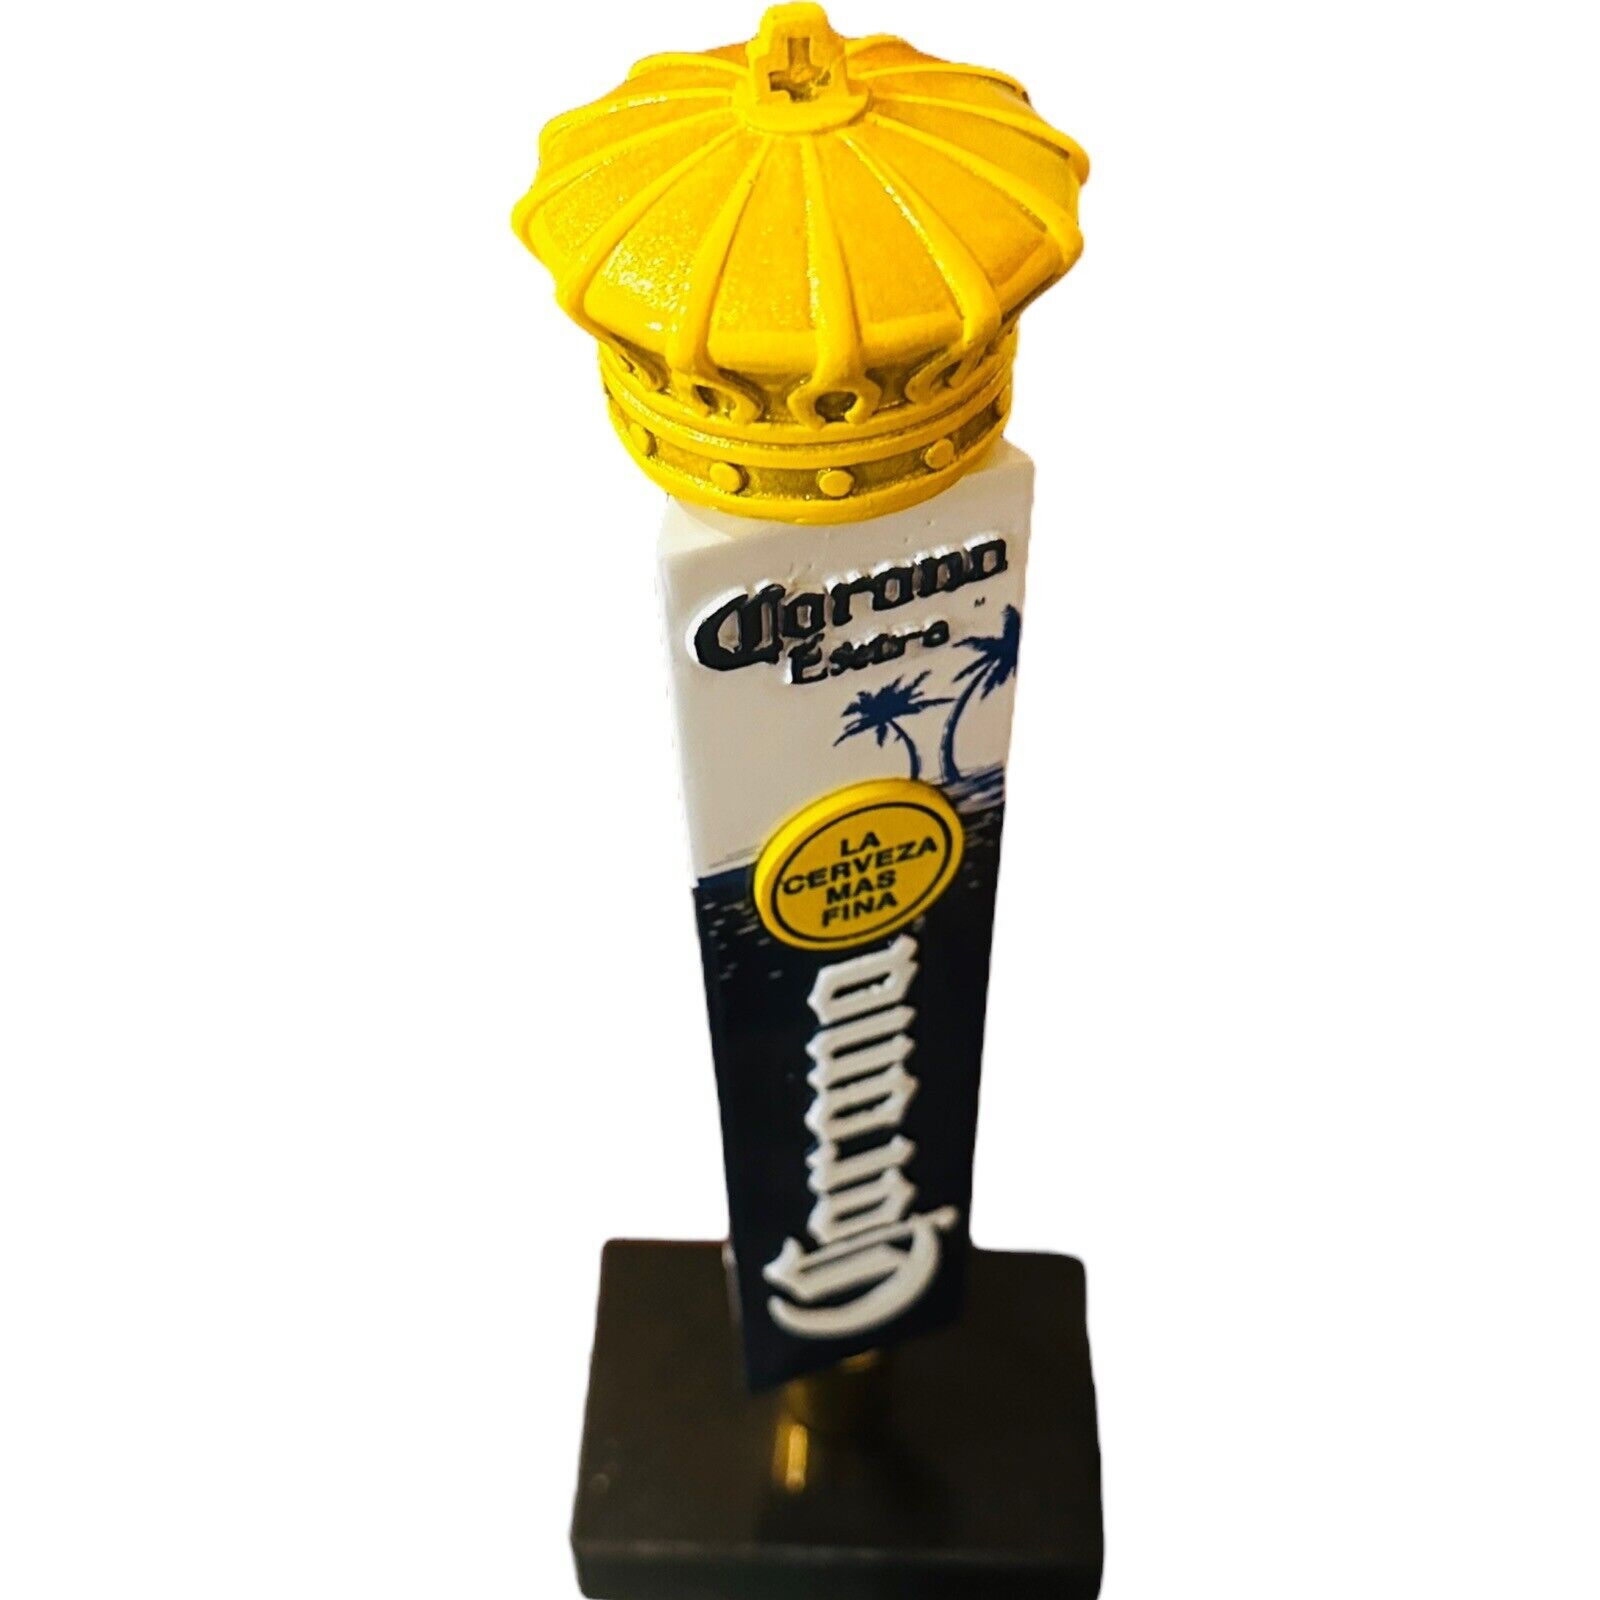 Corona Extra Tap Shotgun Beer Tap Handle with Crown Topper 8.5” Short Shorty